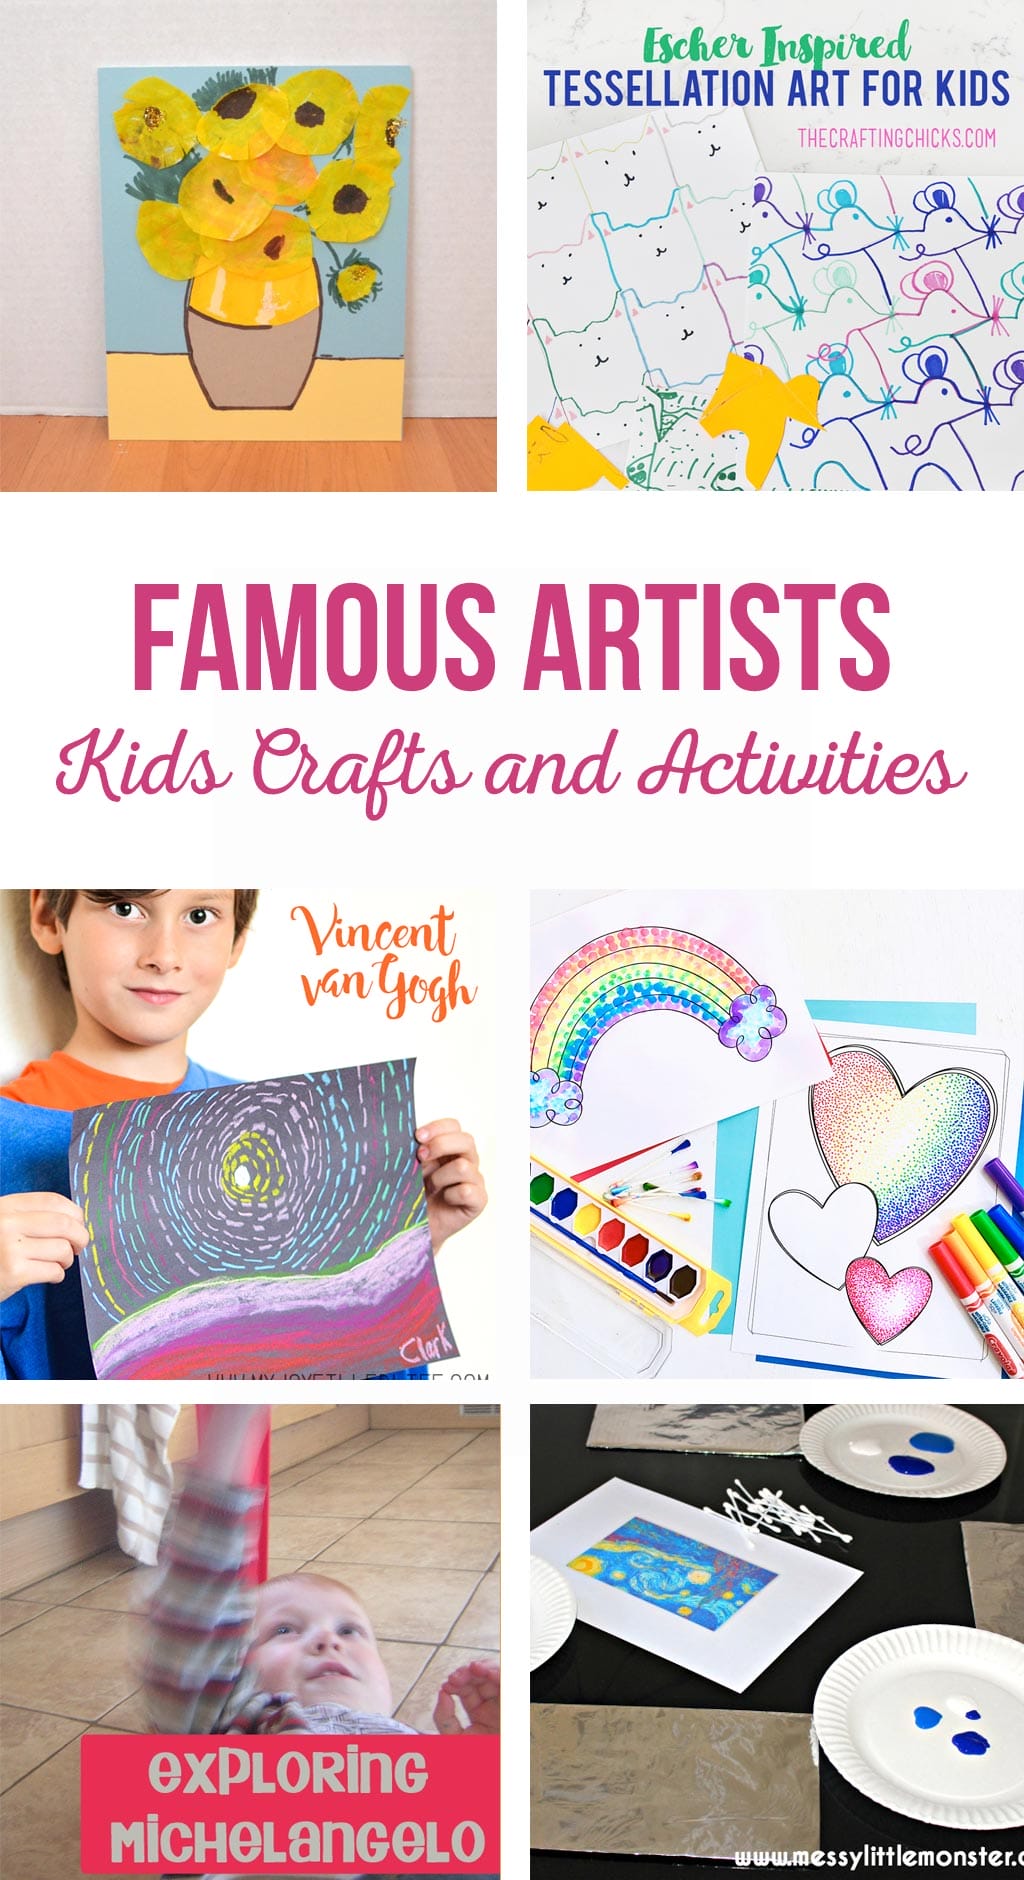 Famous Artists Kids Crafts and Activities | Teach kids about famous artists through fun activities and art projects.